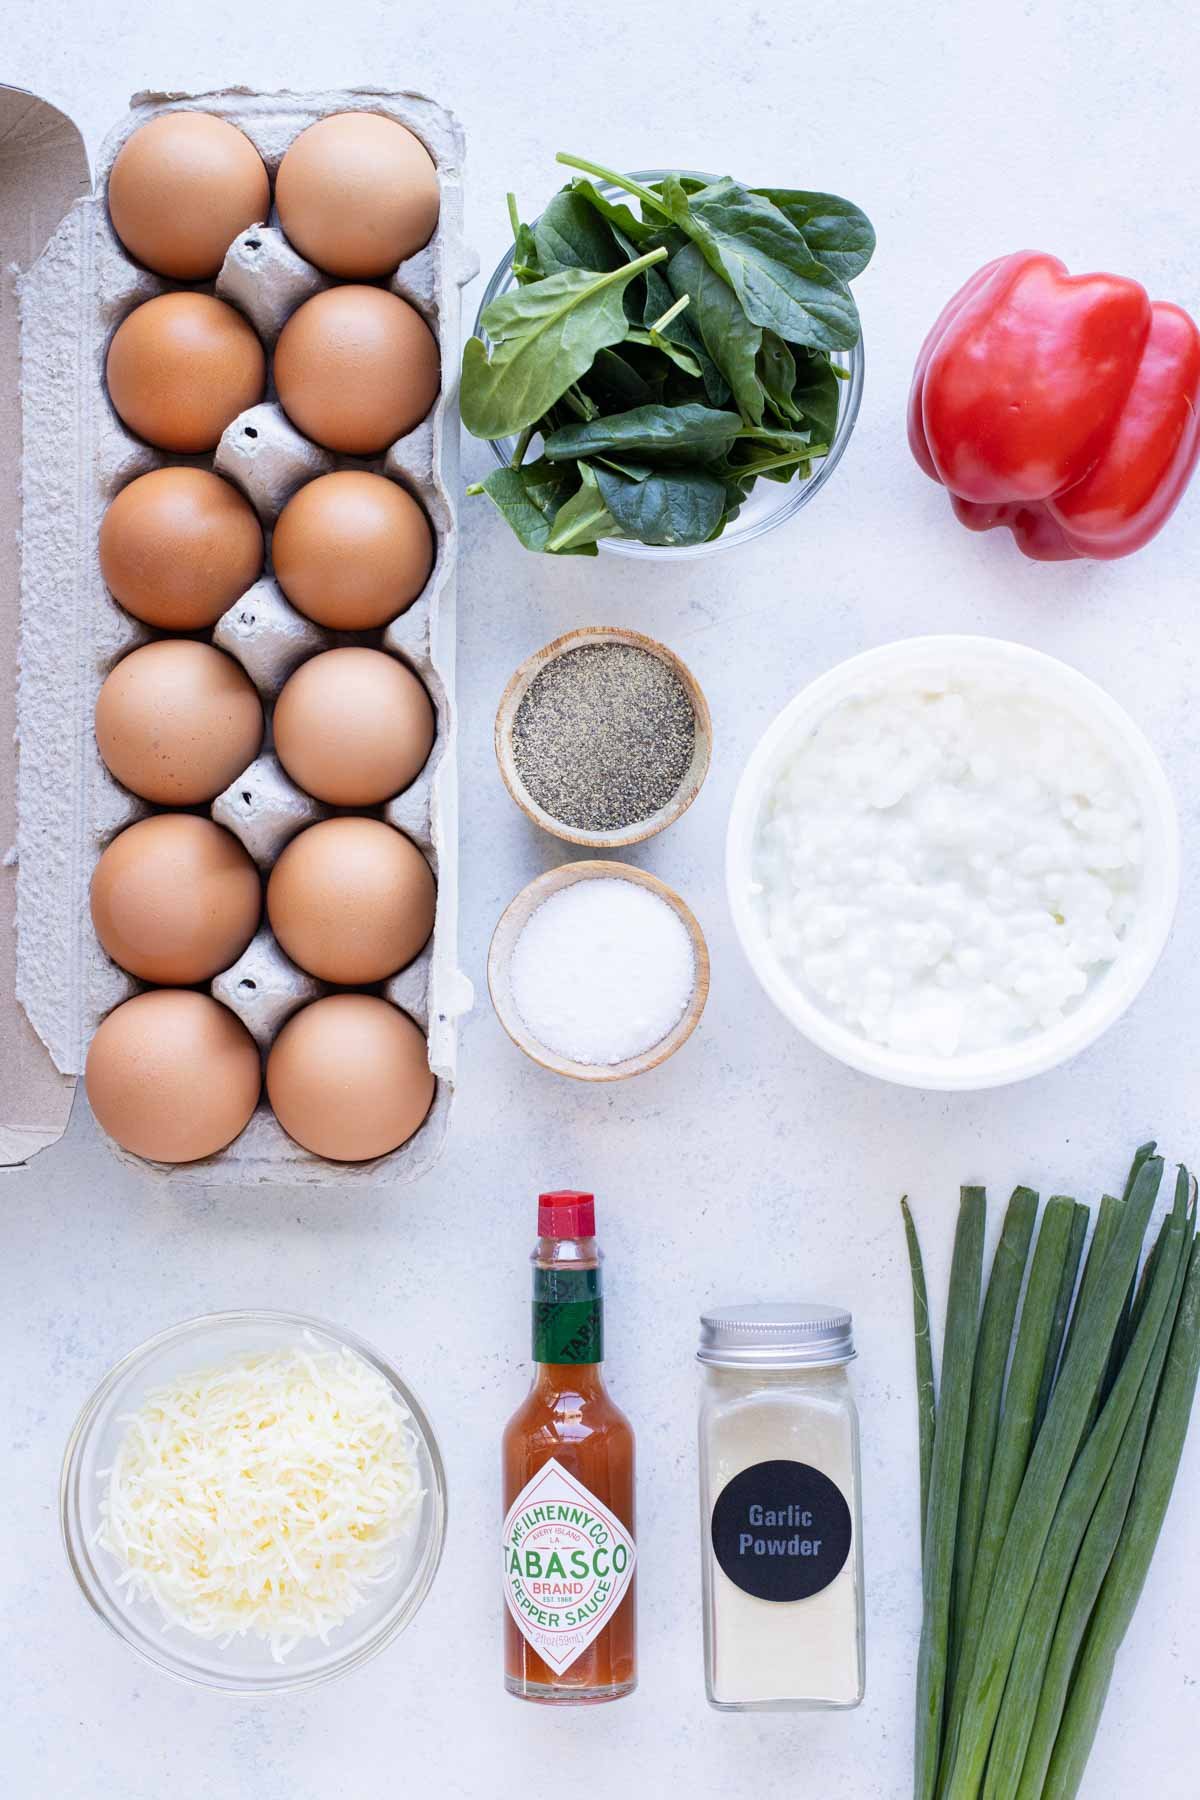 Egg whites, cottage cheese, shredded cheese, bell peppers, spinach, green onions, and seasonings are the ingredients for this recipe.